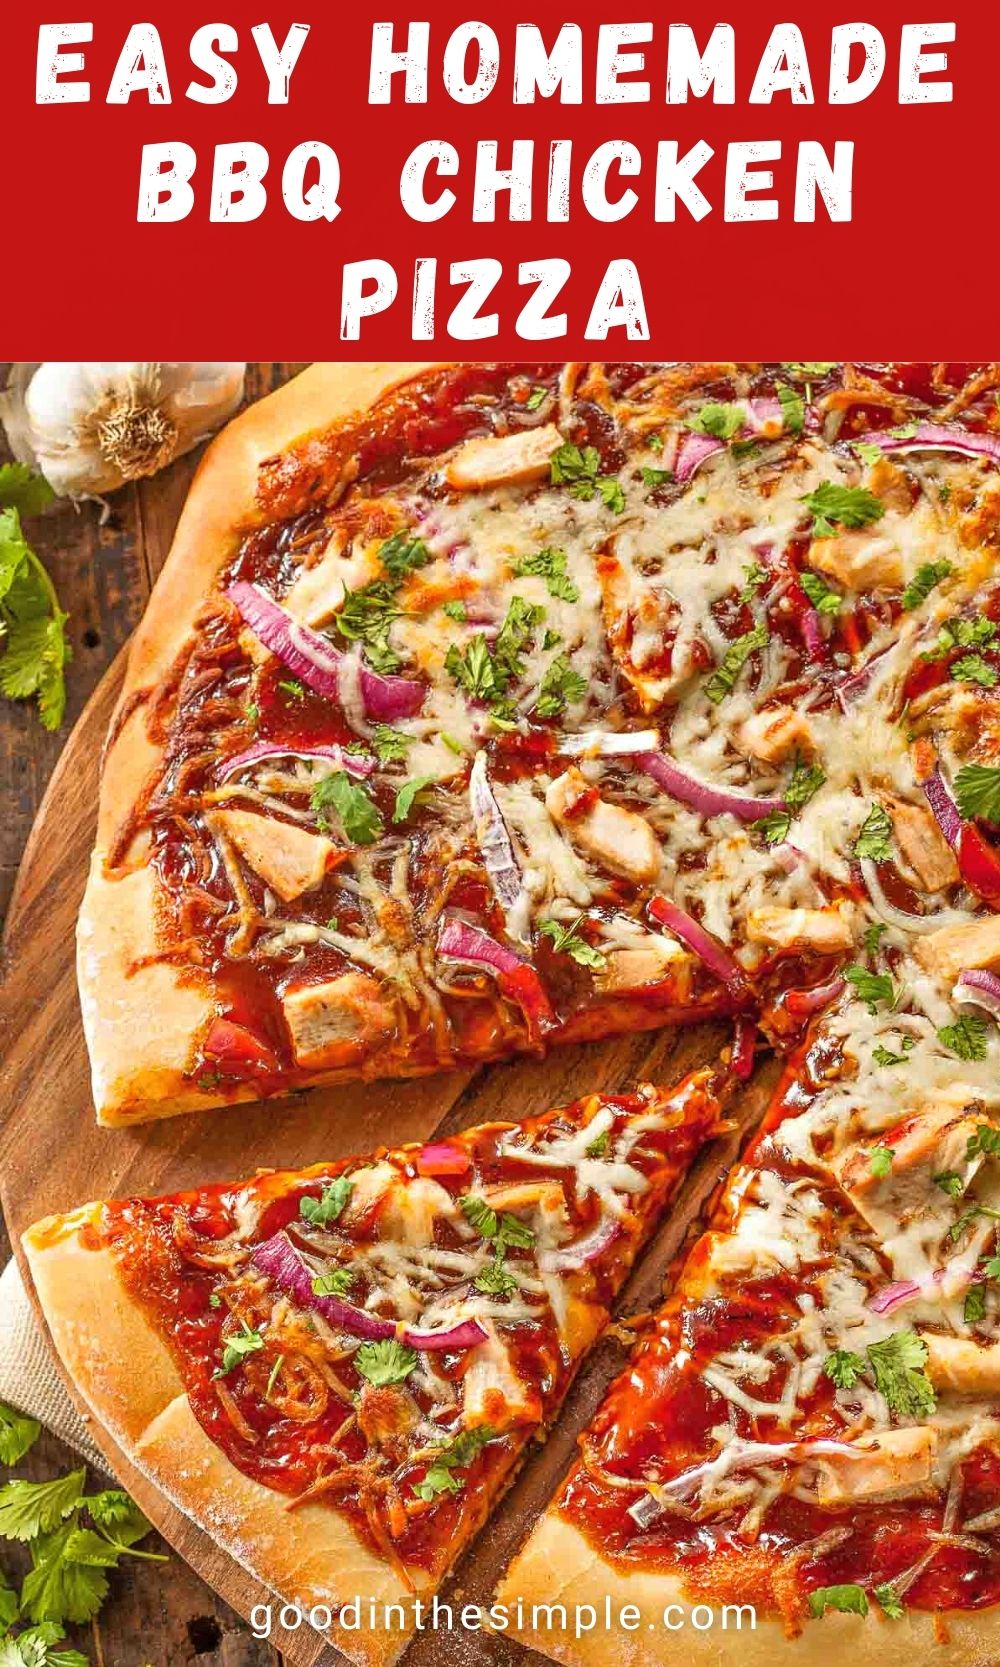 Pinterest image with text: Easy homemade BBQ chicken pizza